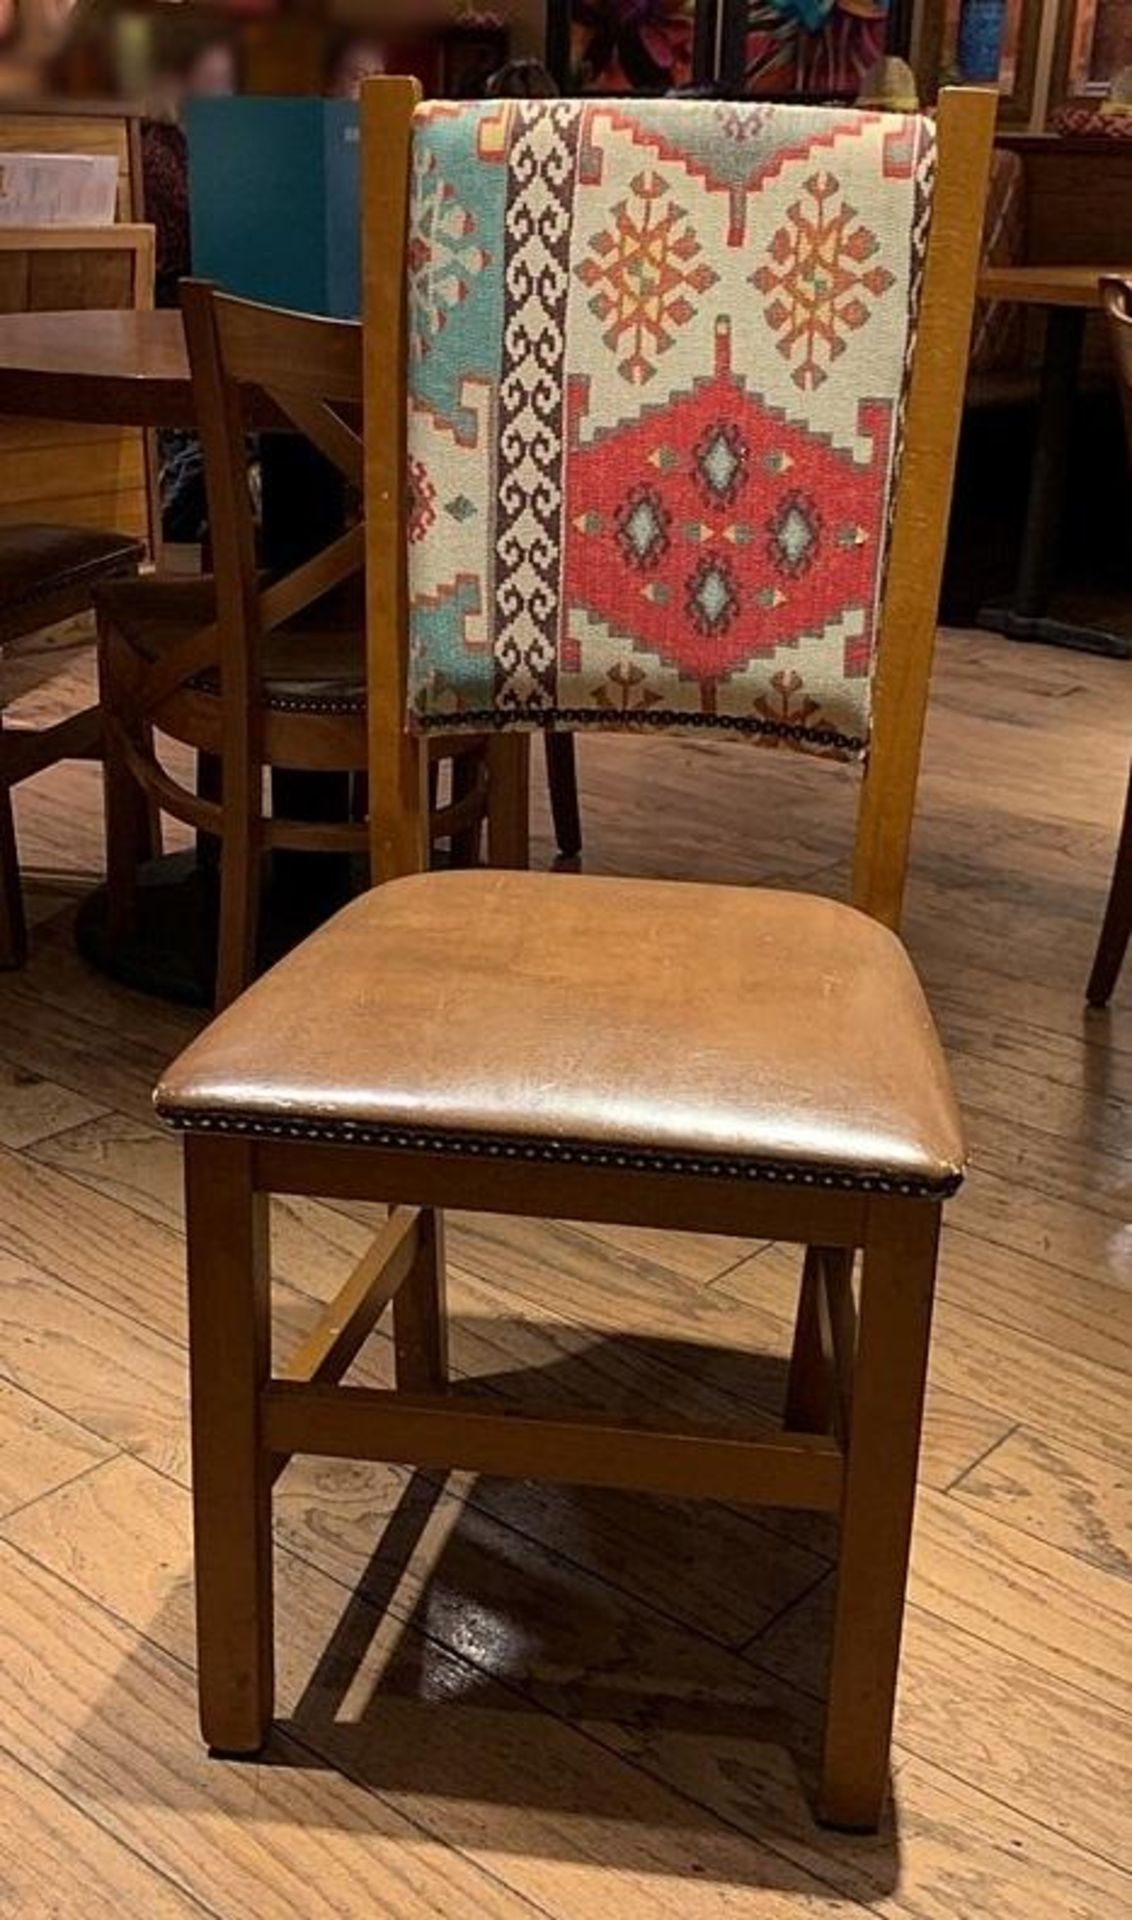 10 x Hi Backed Upholstered Wooden Dining Chair - Dimensions: H100 W46cm - CL339 - From a Popular Mex